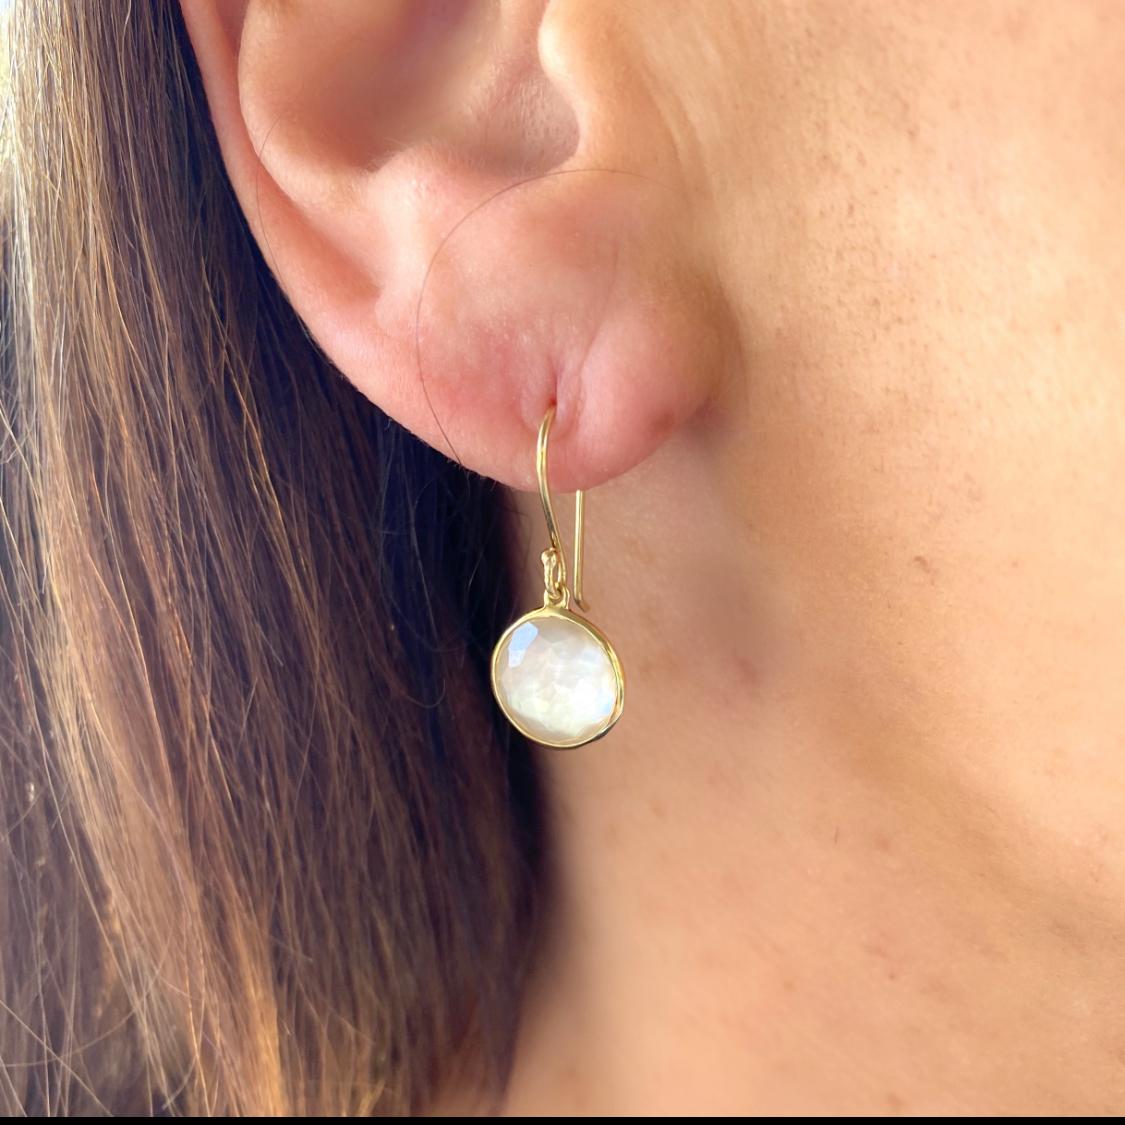 From the Lollipop collection, these 18k drop earrings feature round faceted rock crystal backed by mother-of-pearl. The earrings weigh 2.7 grams, and are 1-in. long. A great pair of earrings that will become your new staple go-to!